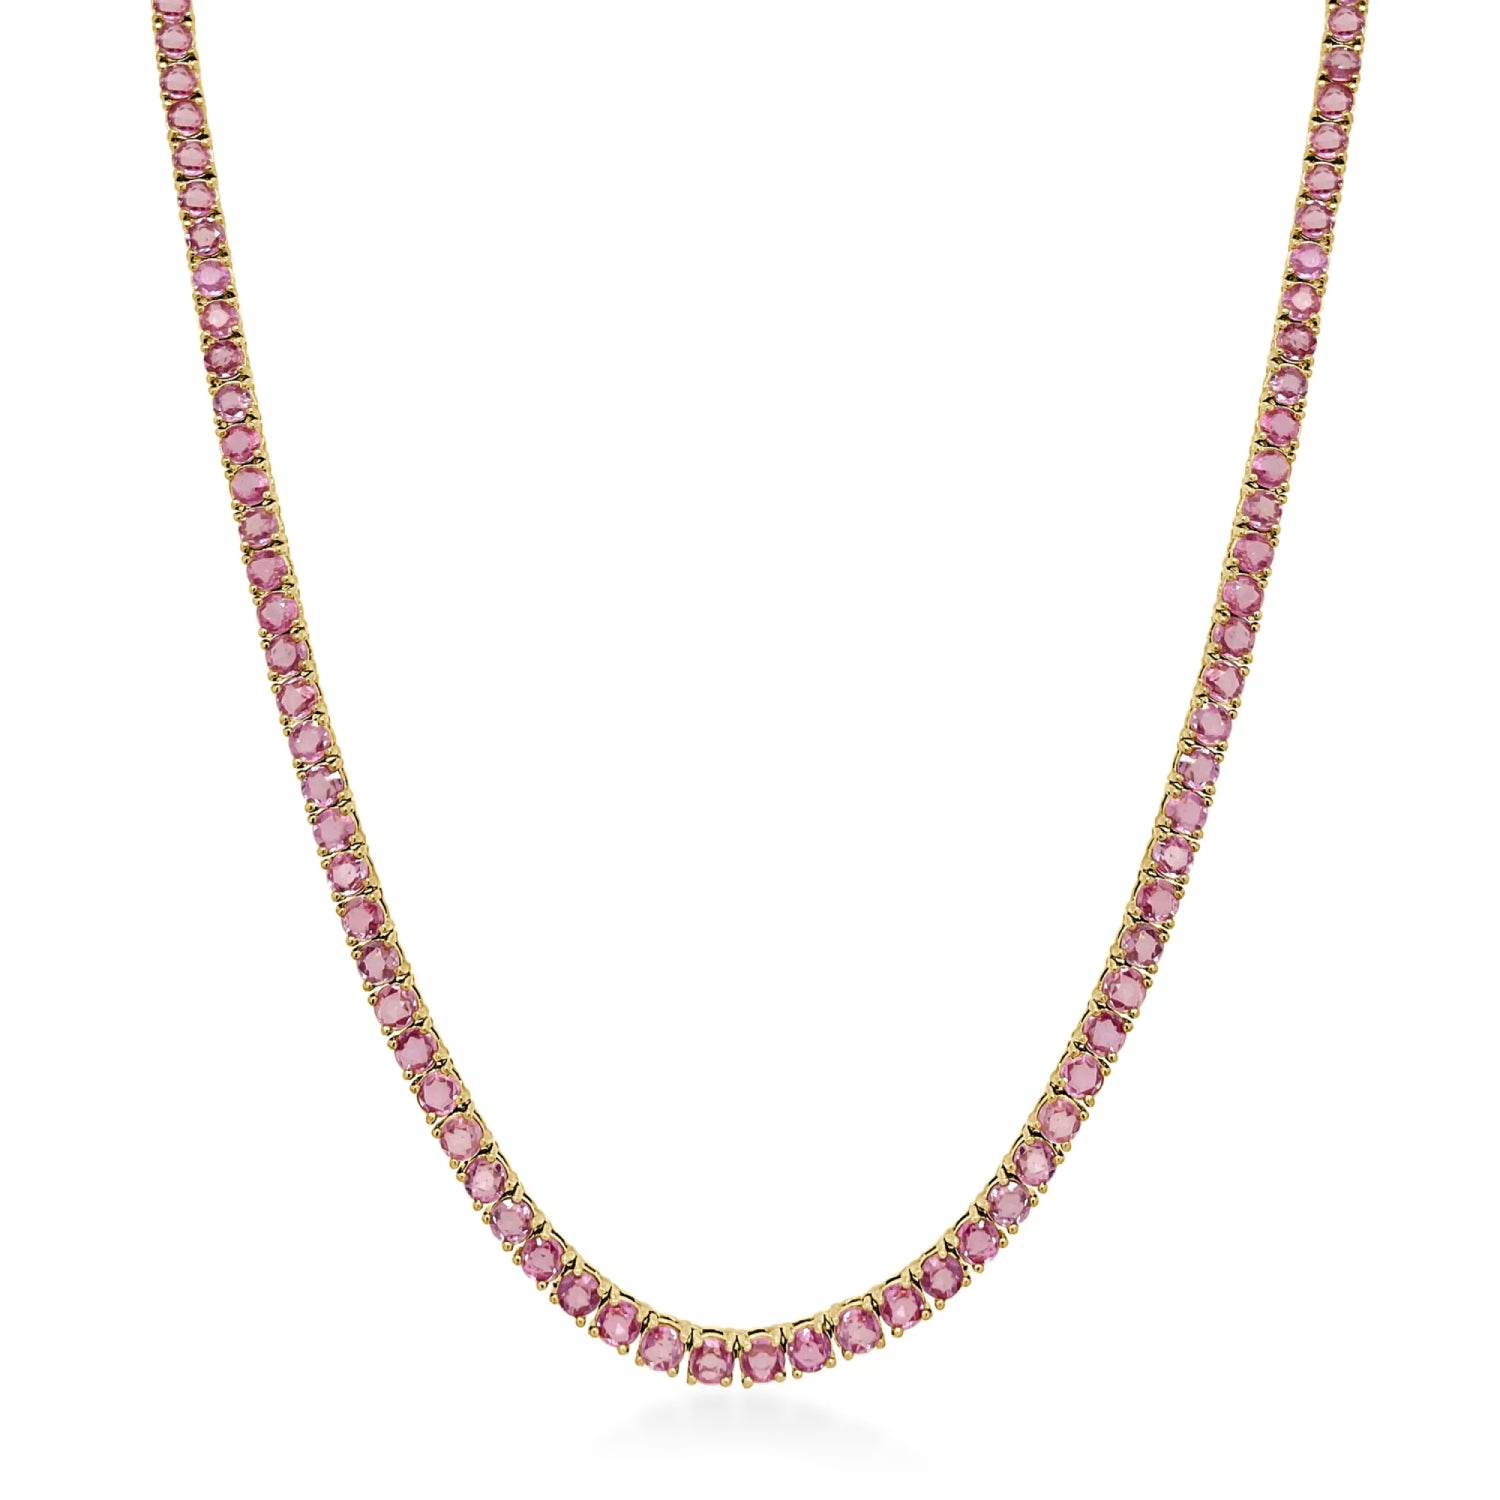 Round Cut Pink Sapphire Tennis Necklace in Yellow Gold